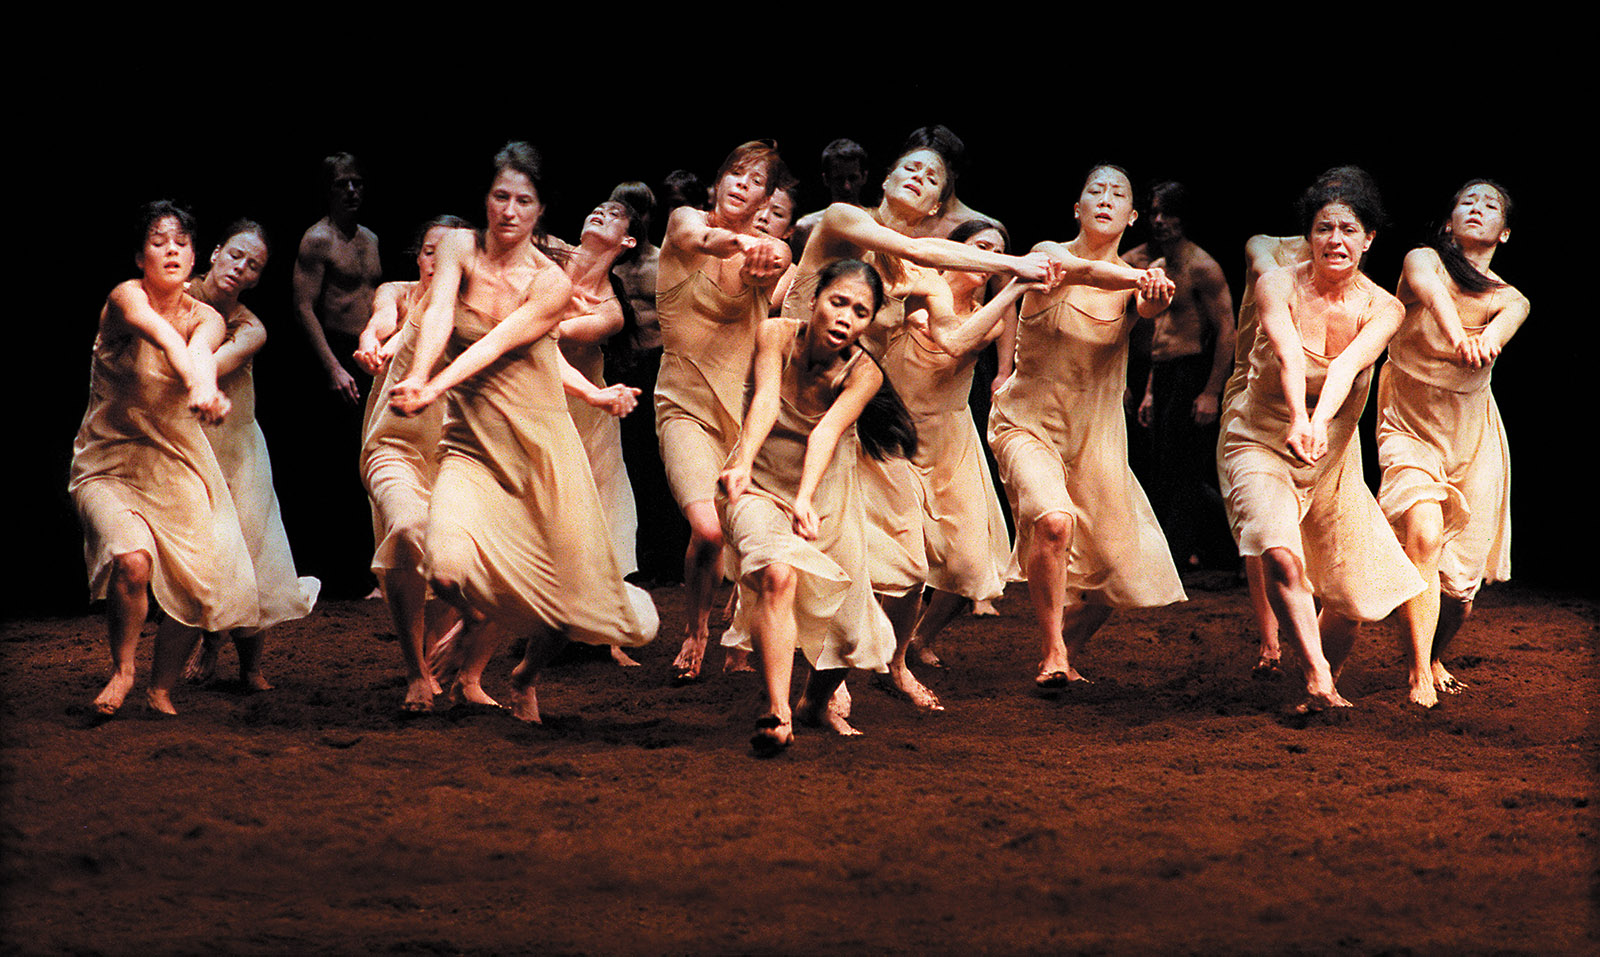 A scene from Pina Bausch’s production of Igor Stravinsky’s The Rite of Spring